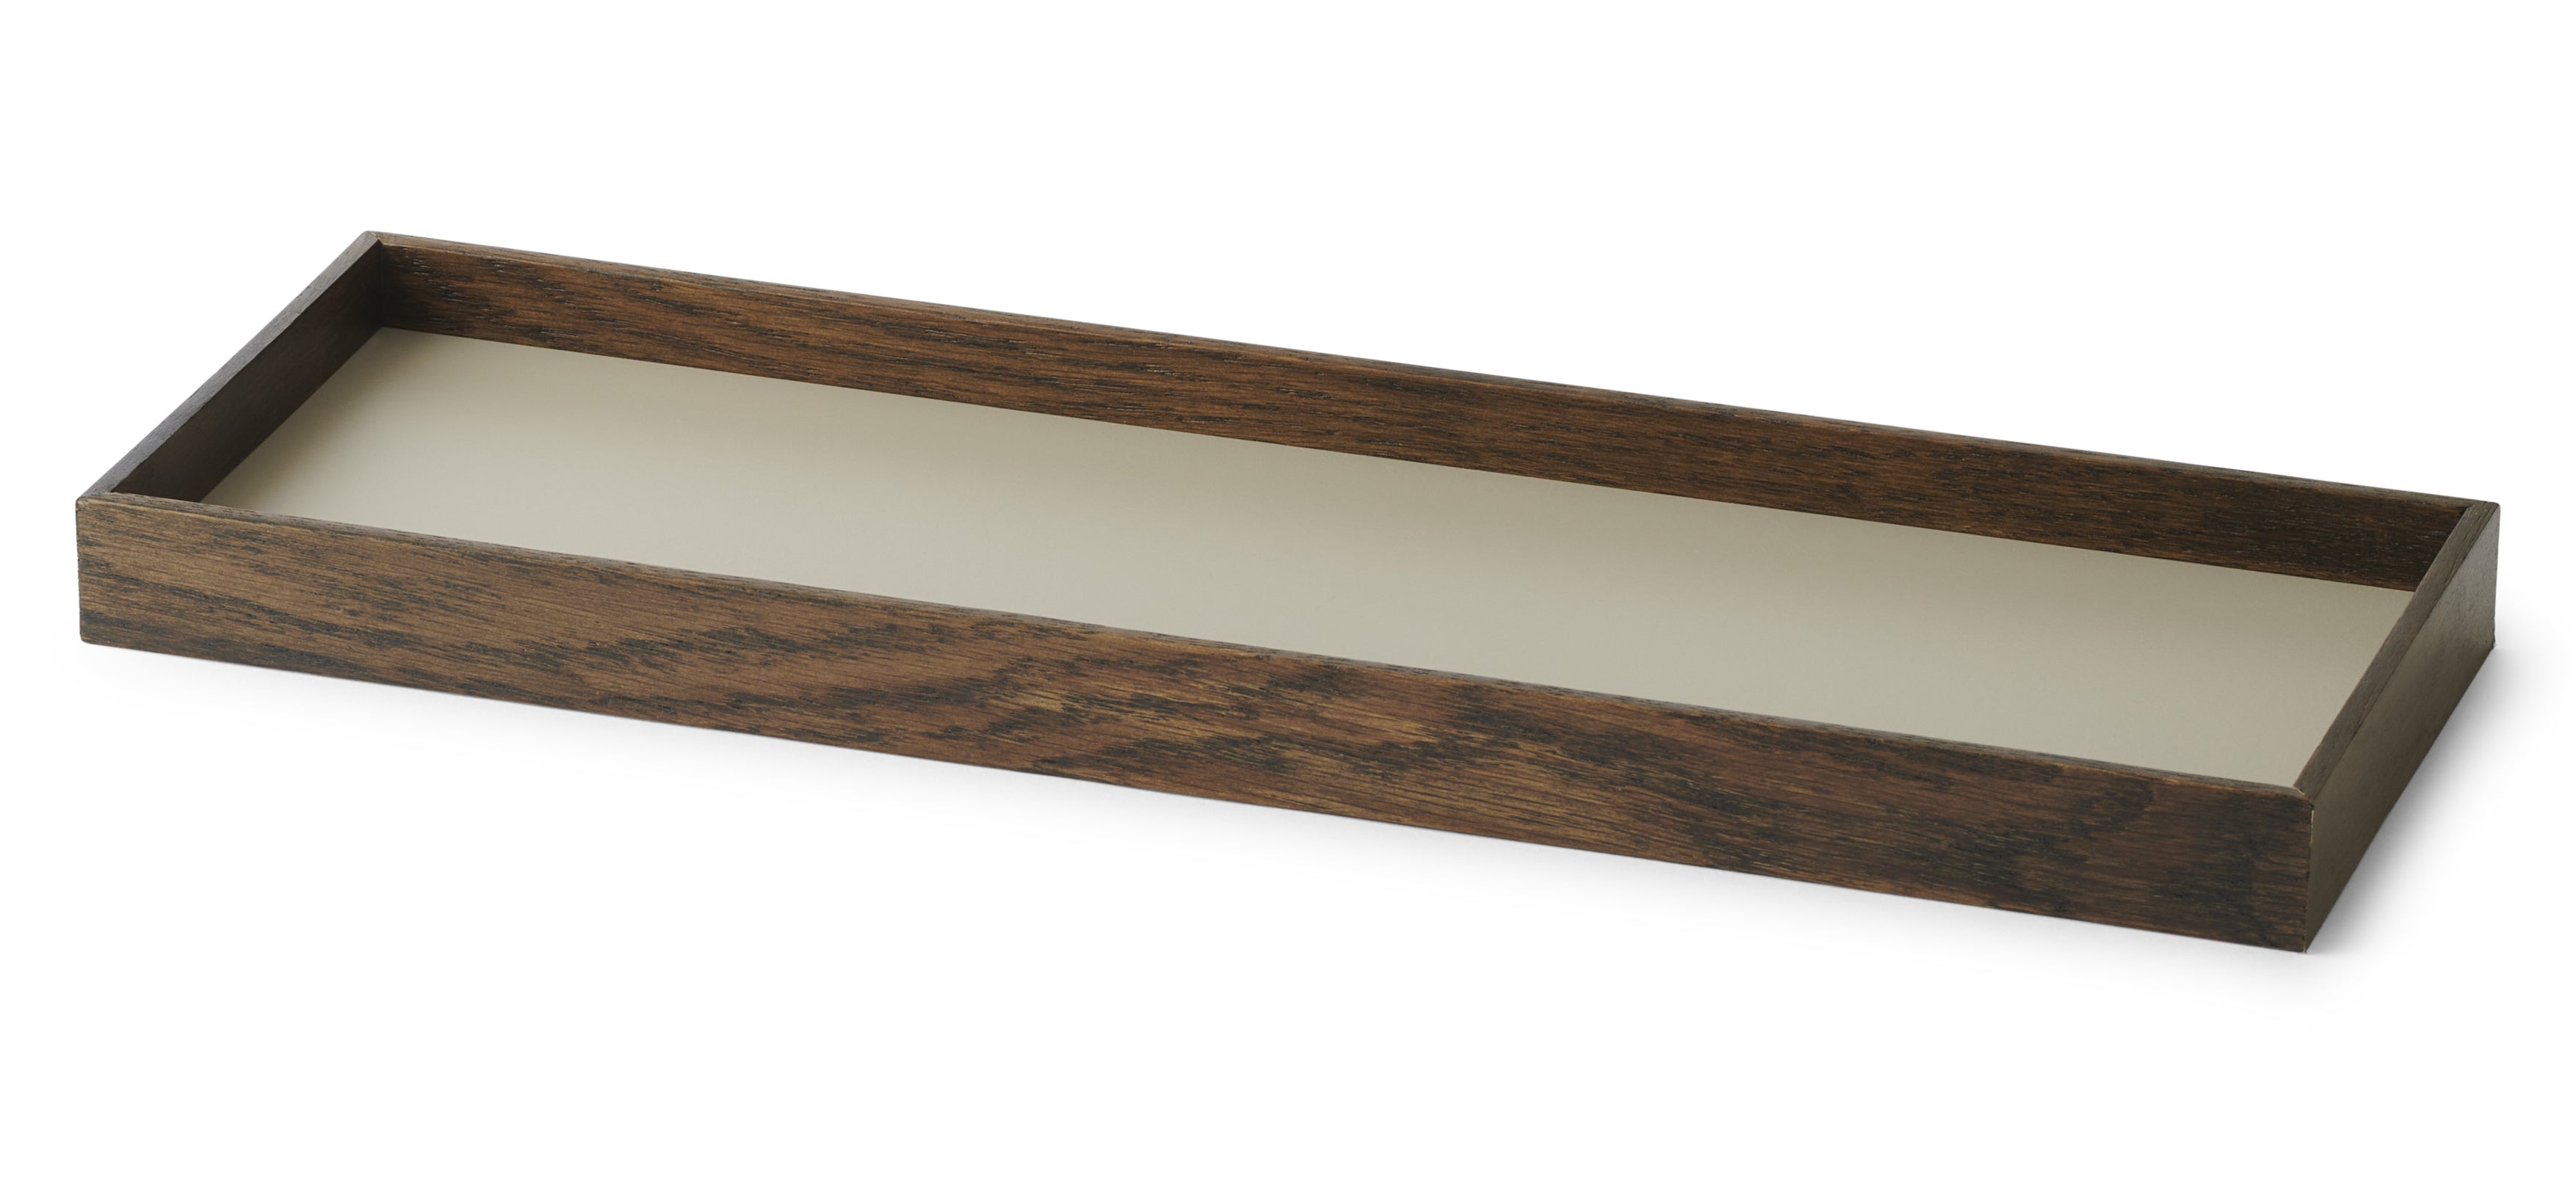 Gejst Frame Tray Smoked Oak/Grey, Small